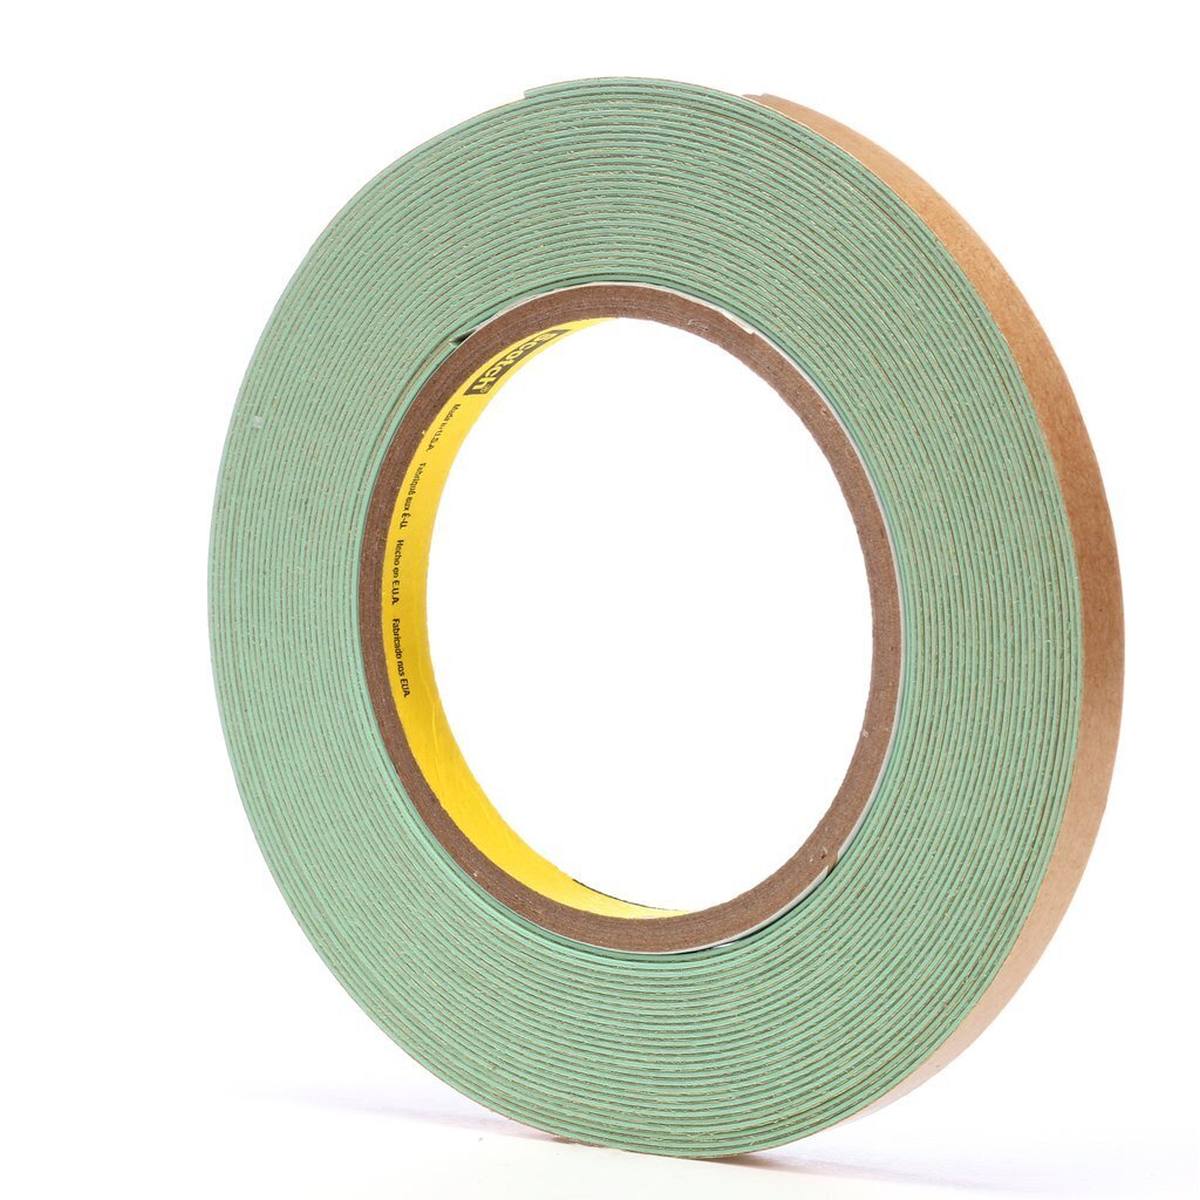 3M Seam sealing tape, light green, 9.1 m x 9.5 mm x 0.9 mm, can be painted over